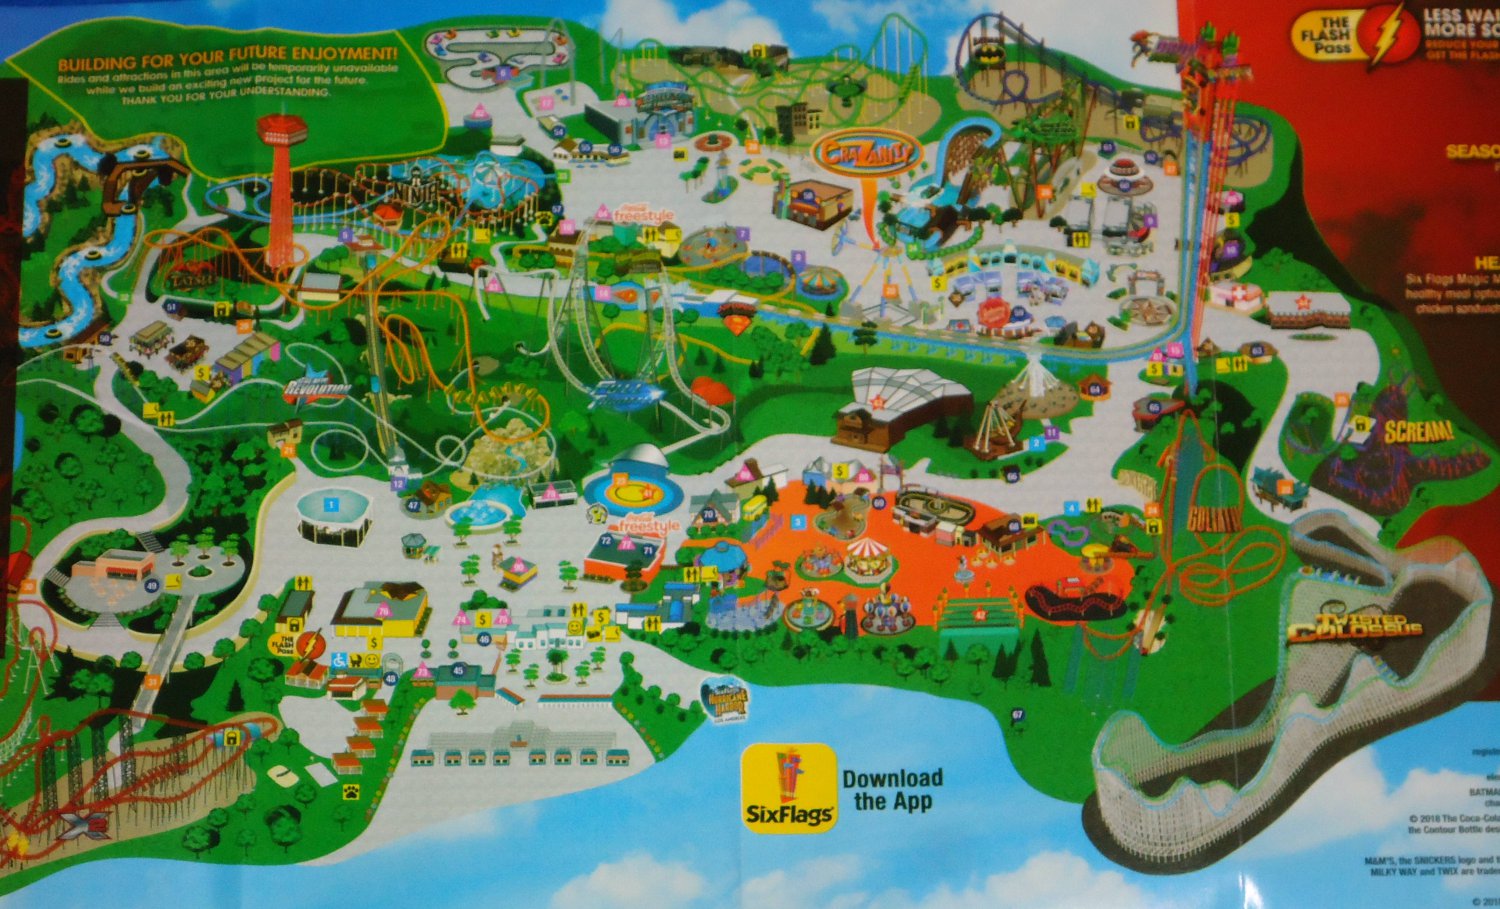 BRAND NEW OUTSTANDING 2018 SIX FLAGS MAGIC MOUNTAIN PARK MAP AND GUIDE